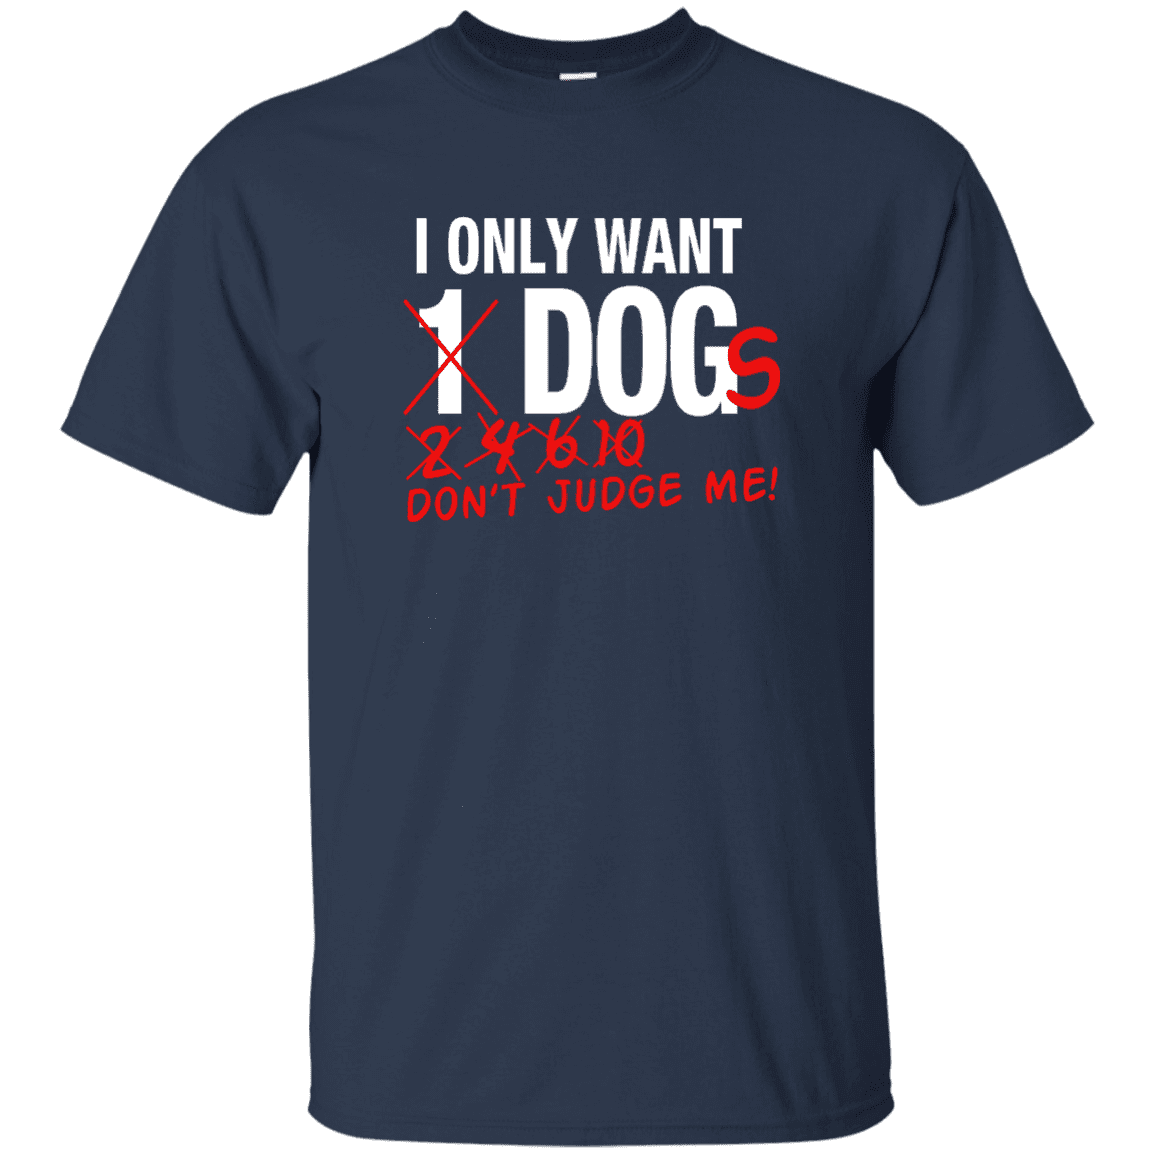 I Only Want 1 Dog - T Shirt.